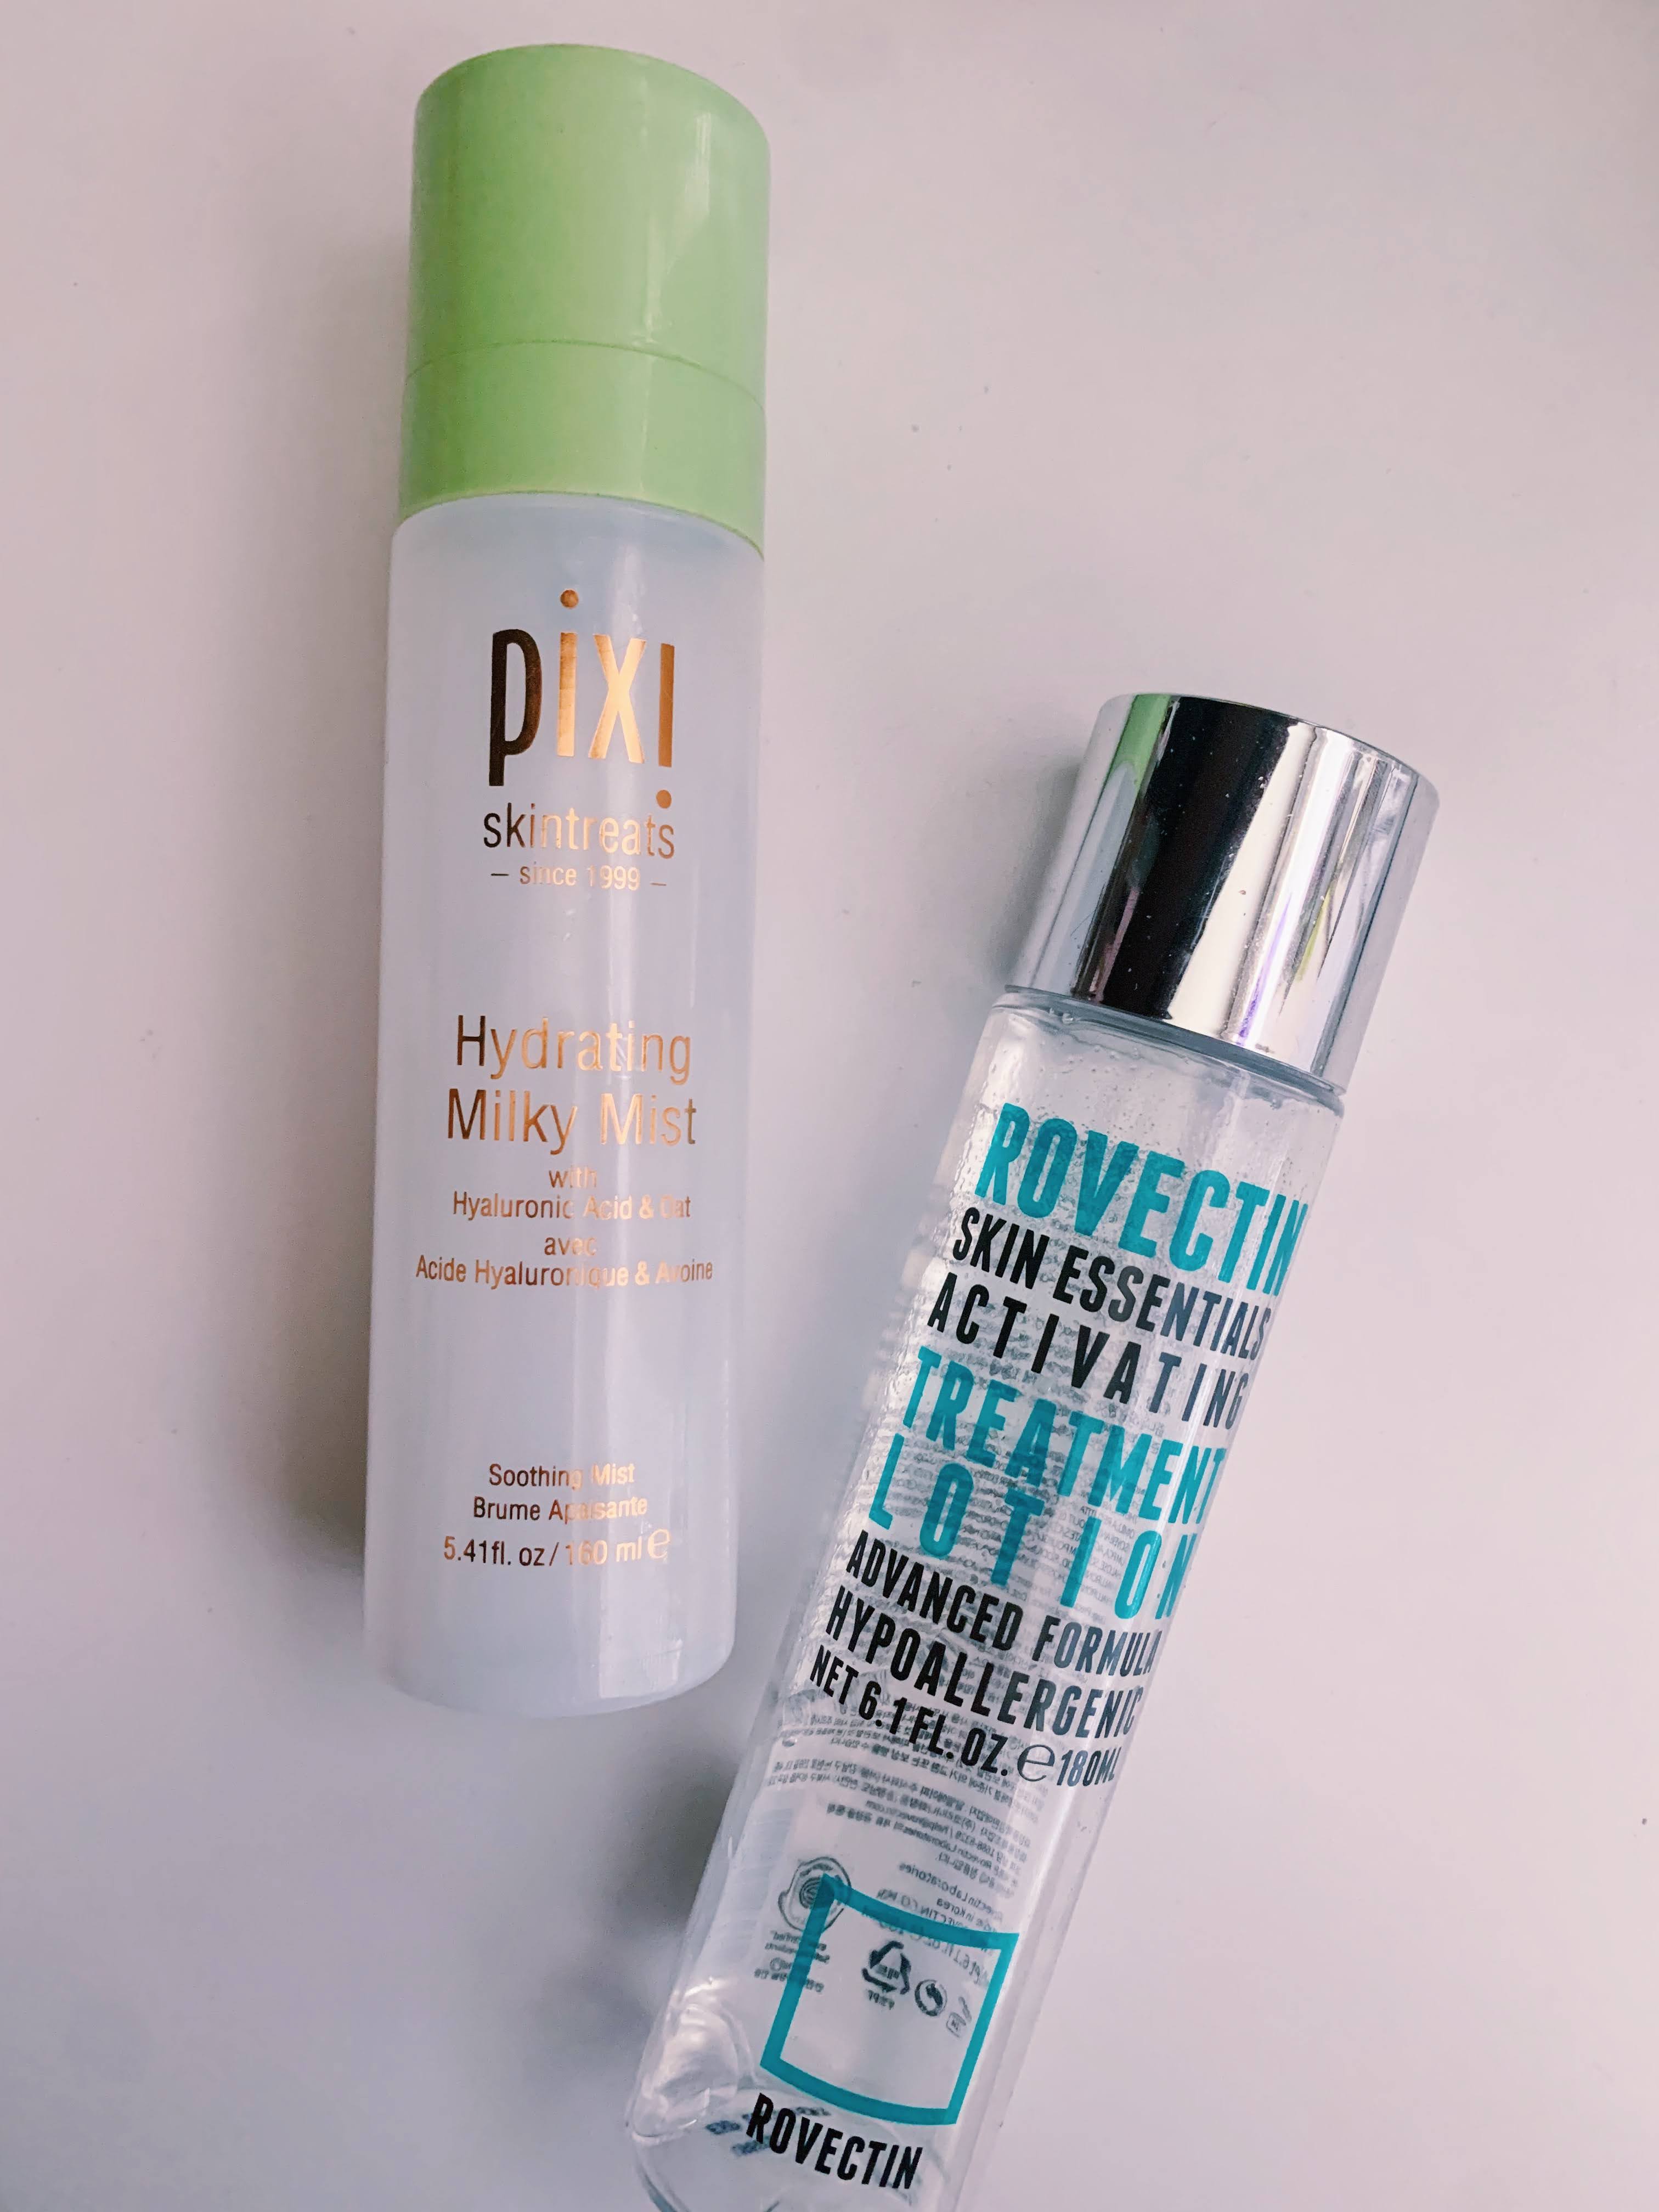 Photo of Pixi's Hydrating Milky Mist and Rovectin Activating Treatment Lotion